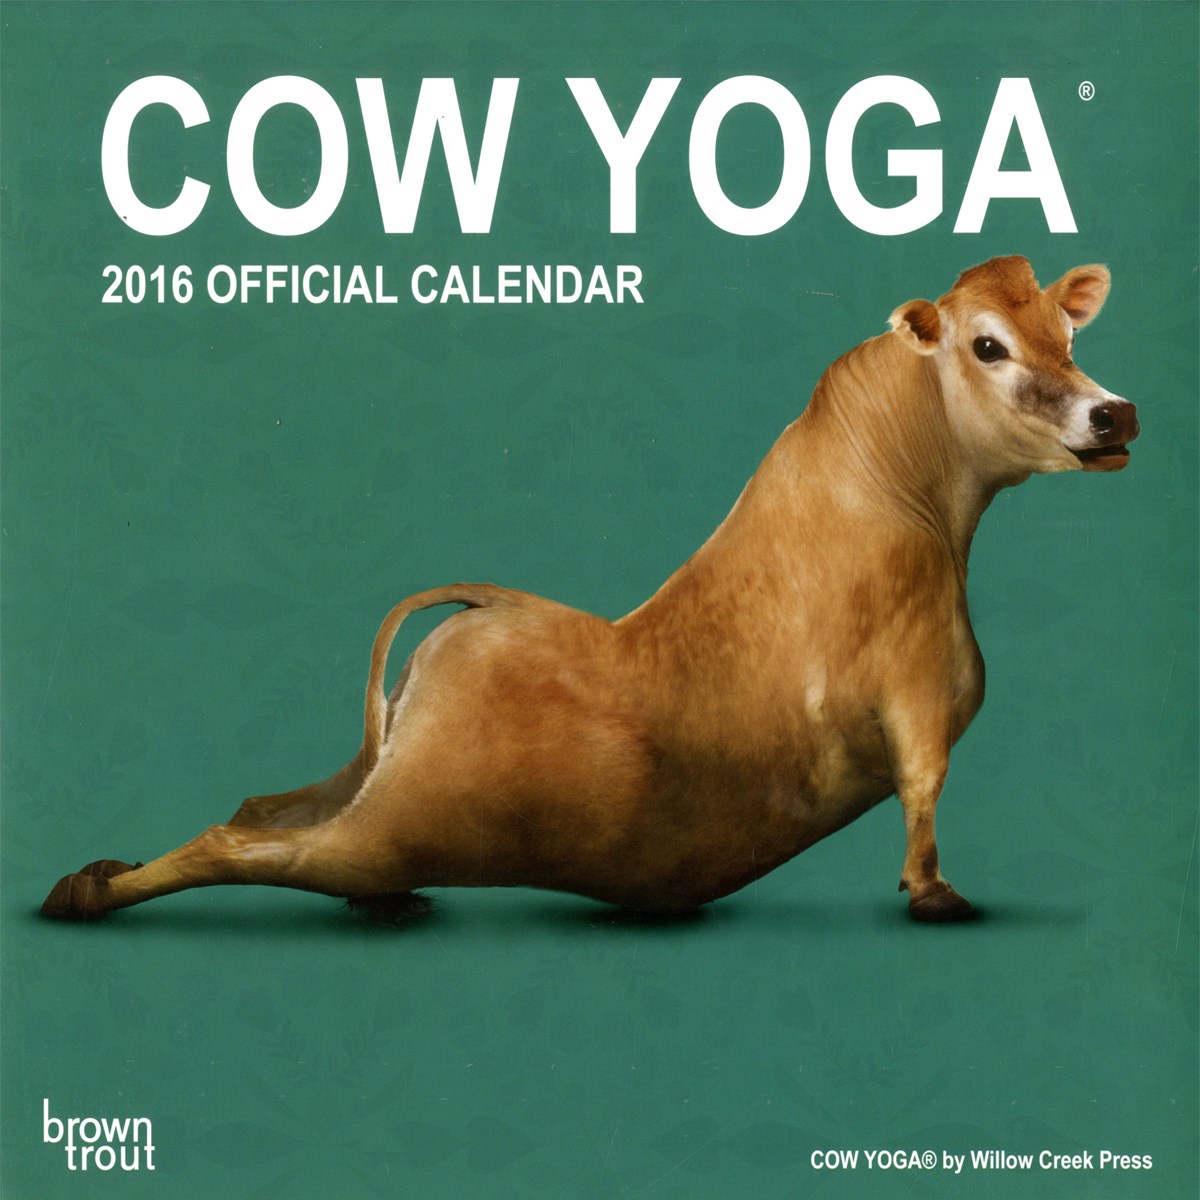 Cow Yoga 2016 Square Calendar Buy Online at